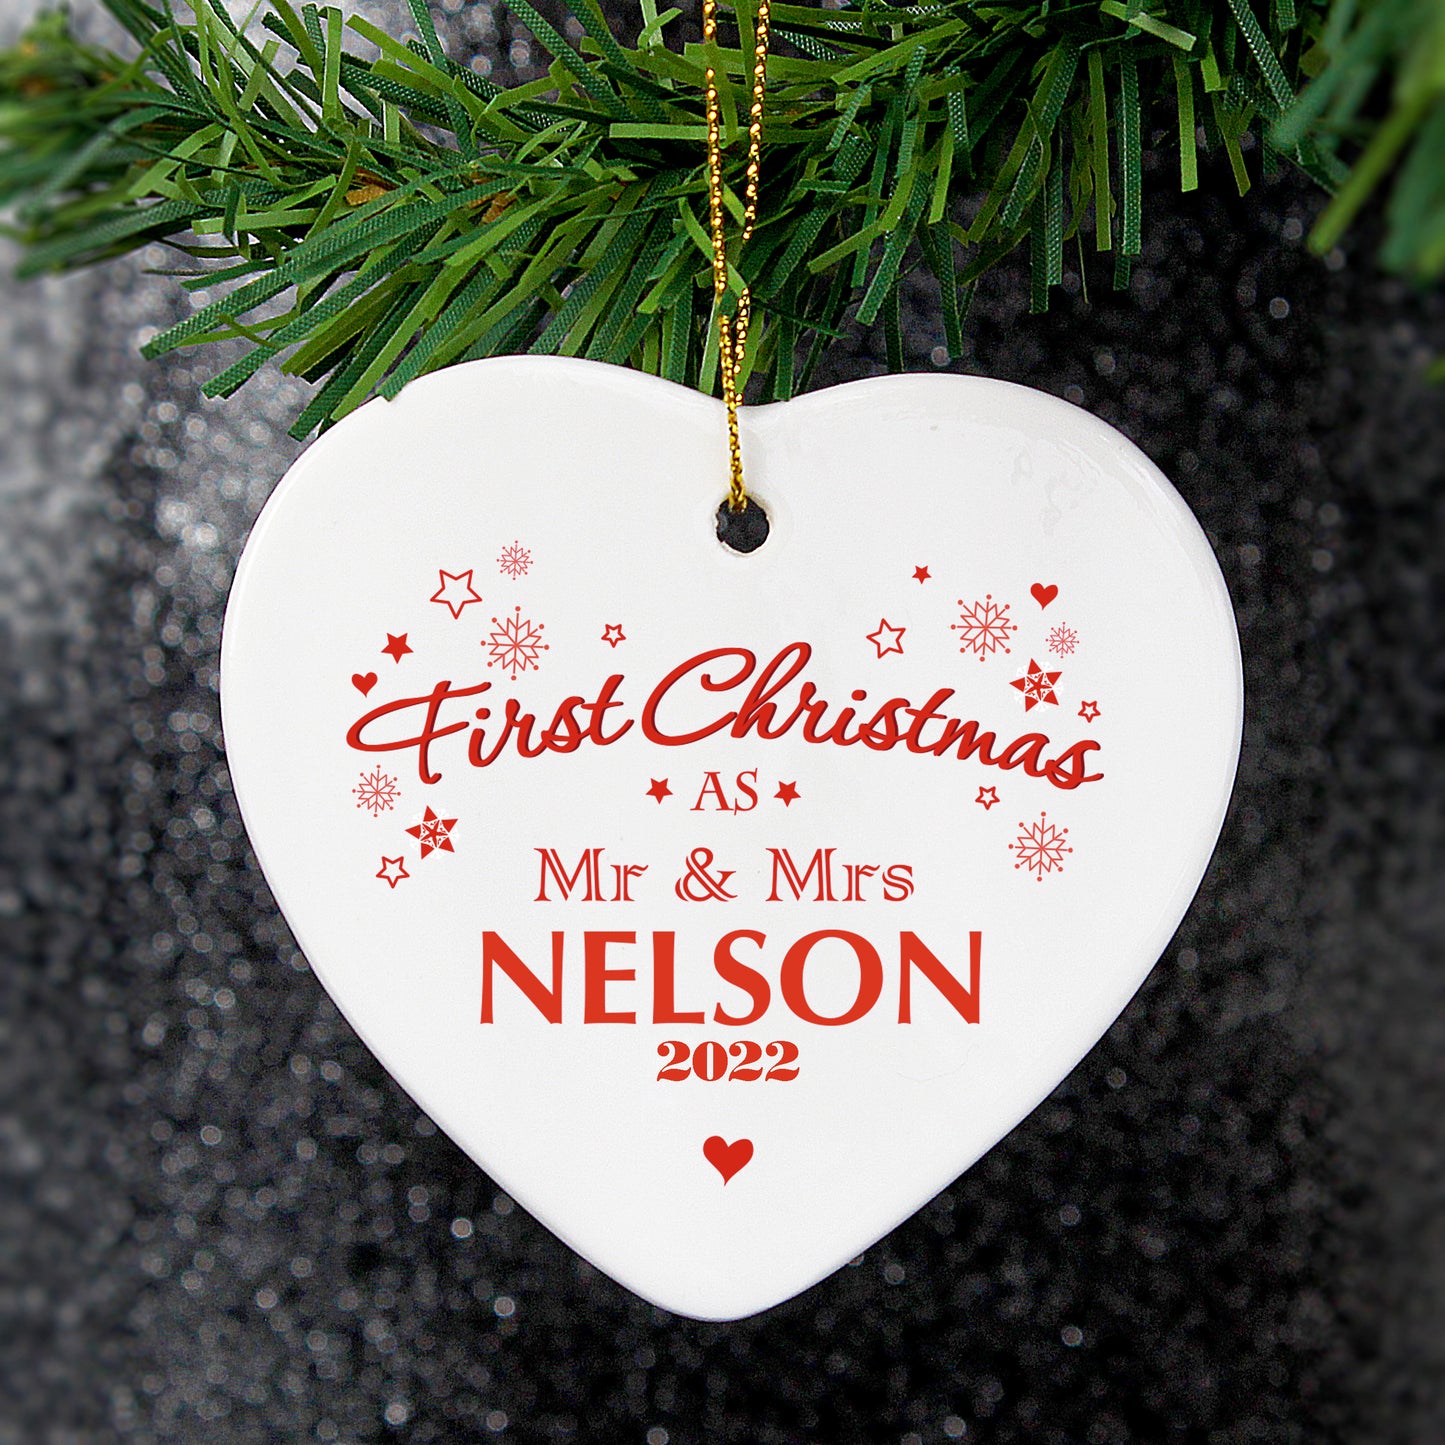 Personalised 'Our First Christmas' Ceramic Heart Decoration - Personalise It!